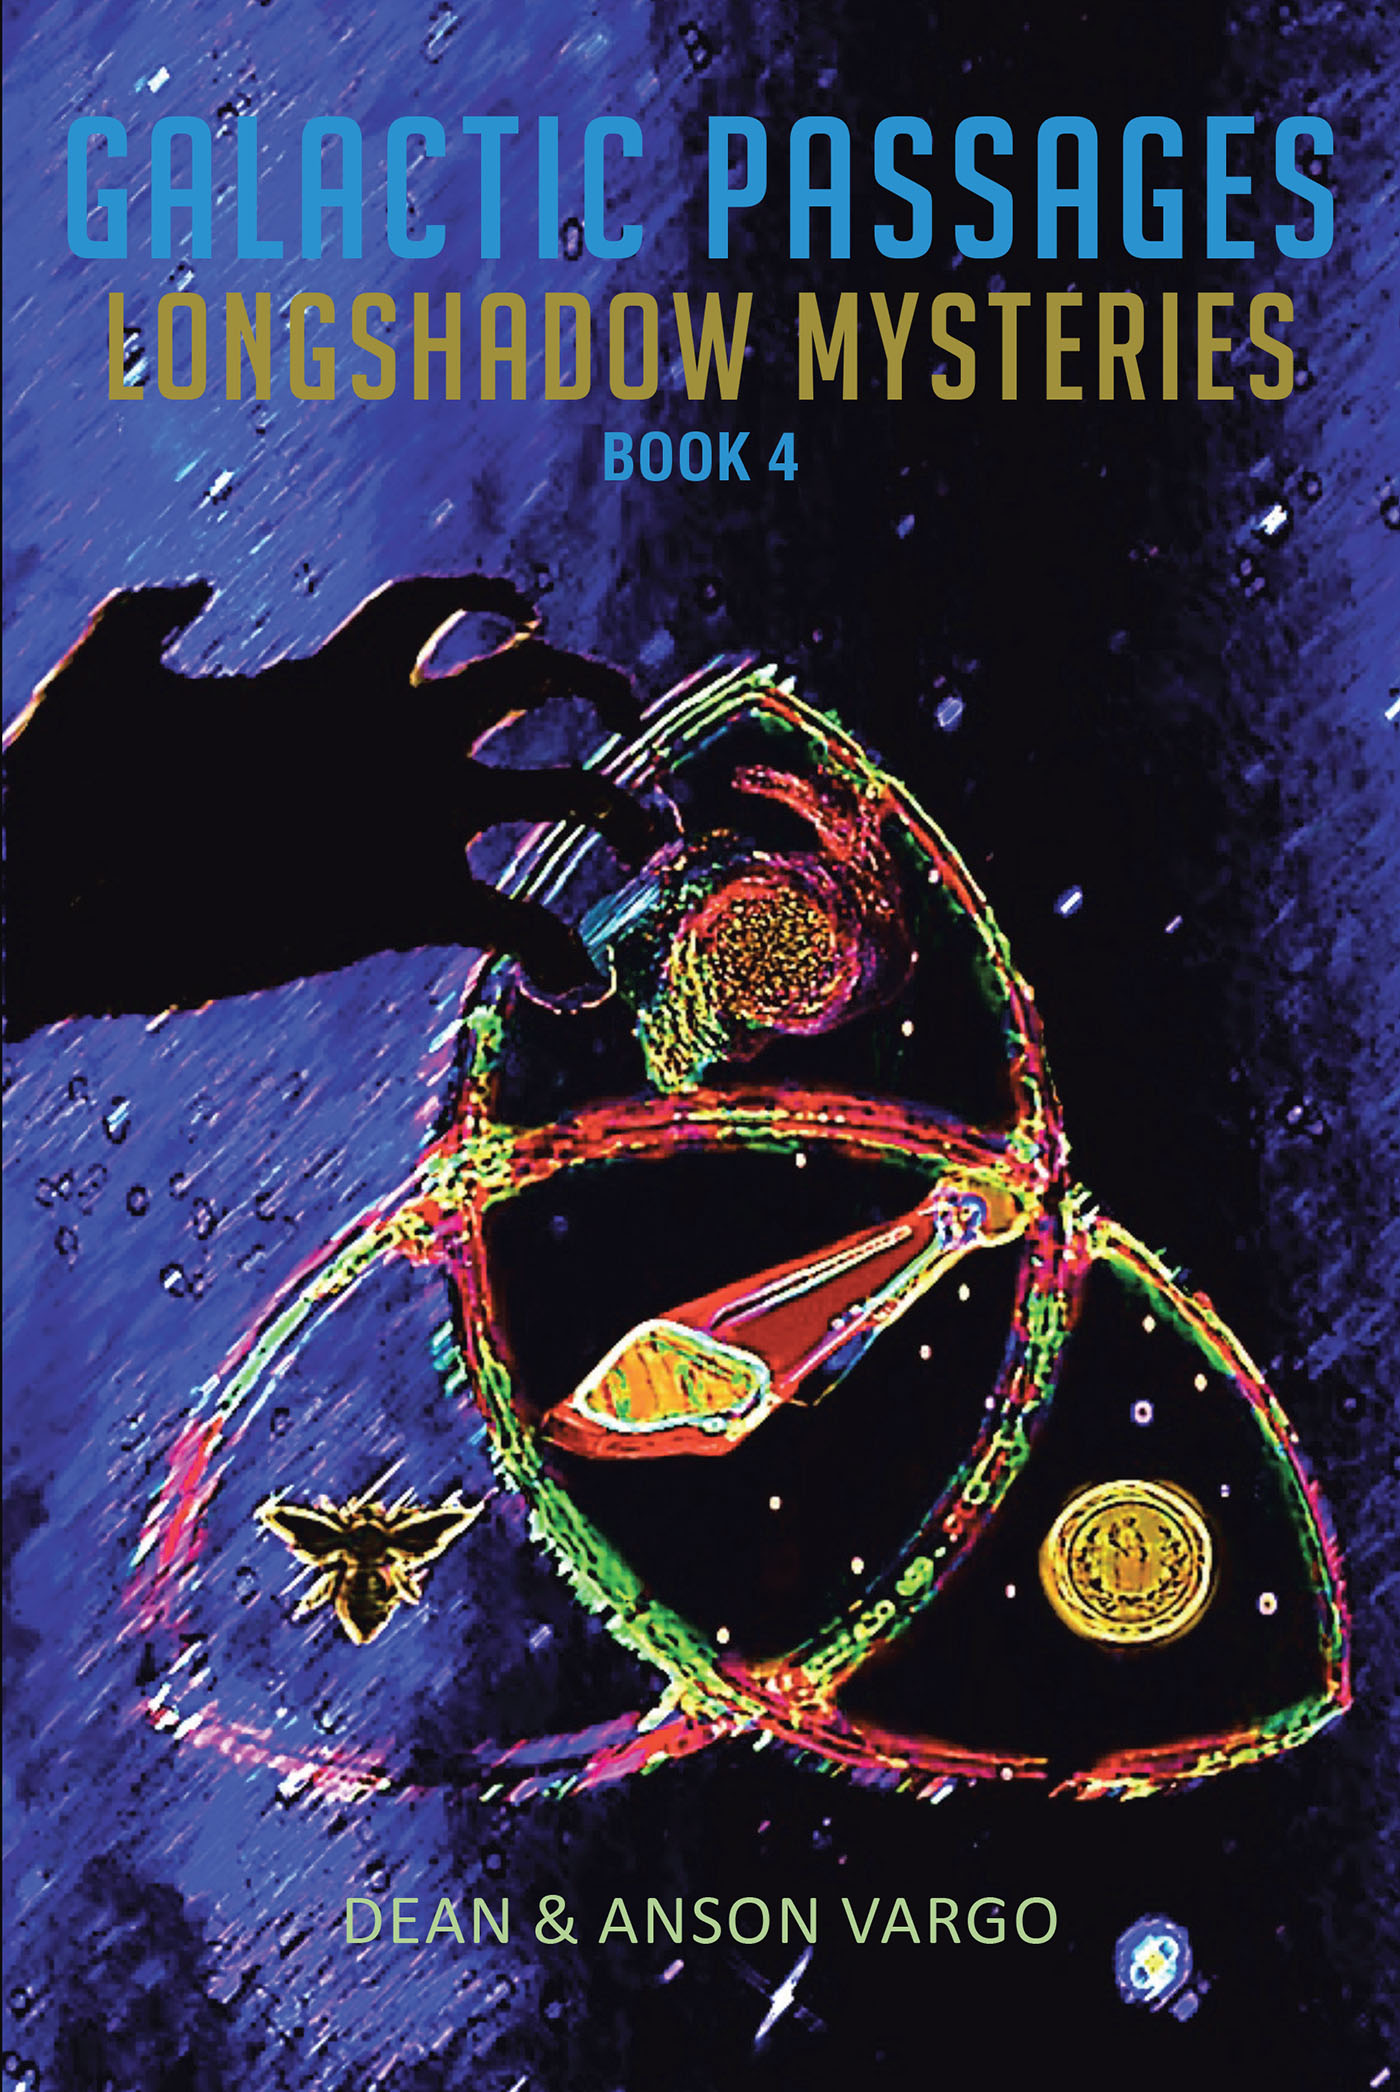 Dean & Anson Vargo’s Newly Released "Galactic Passages: Longshadow Mysteries" is a Compelling Journey of Determination and Faith